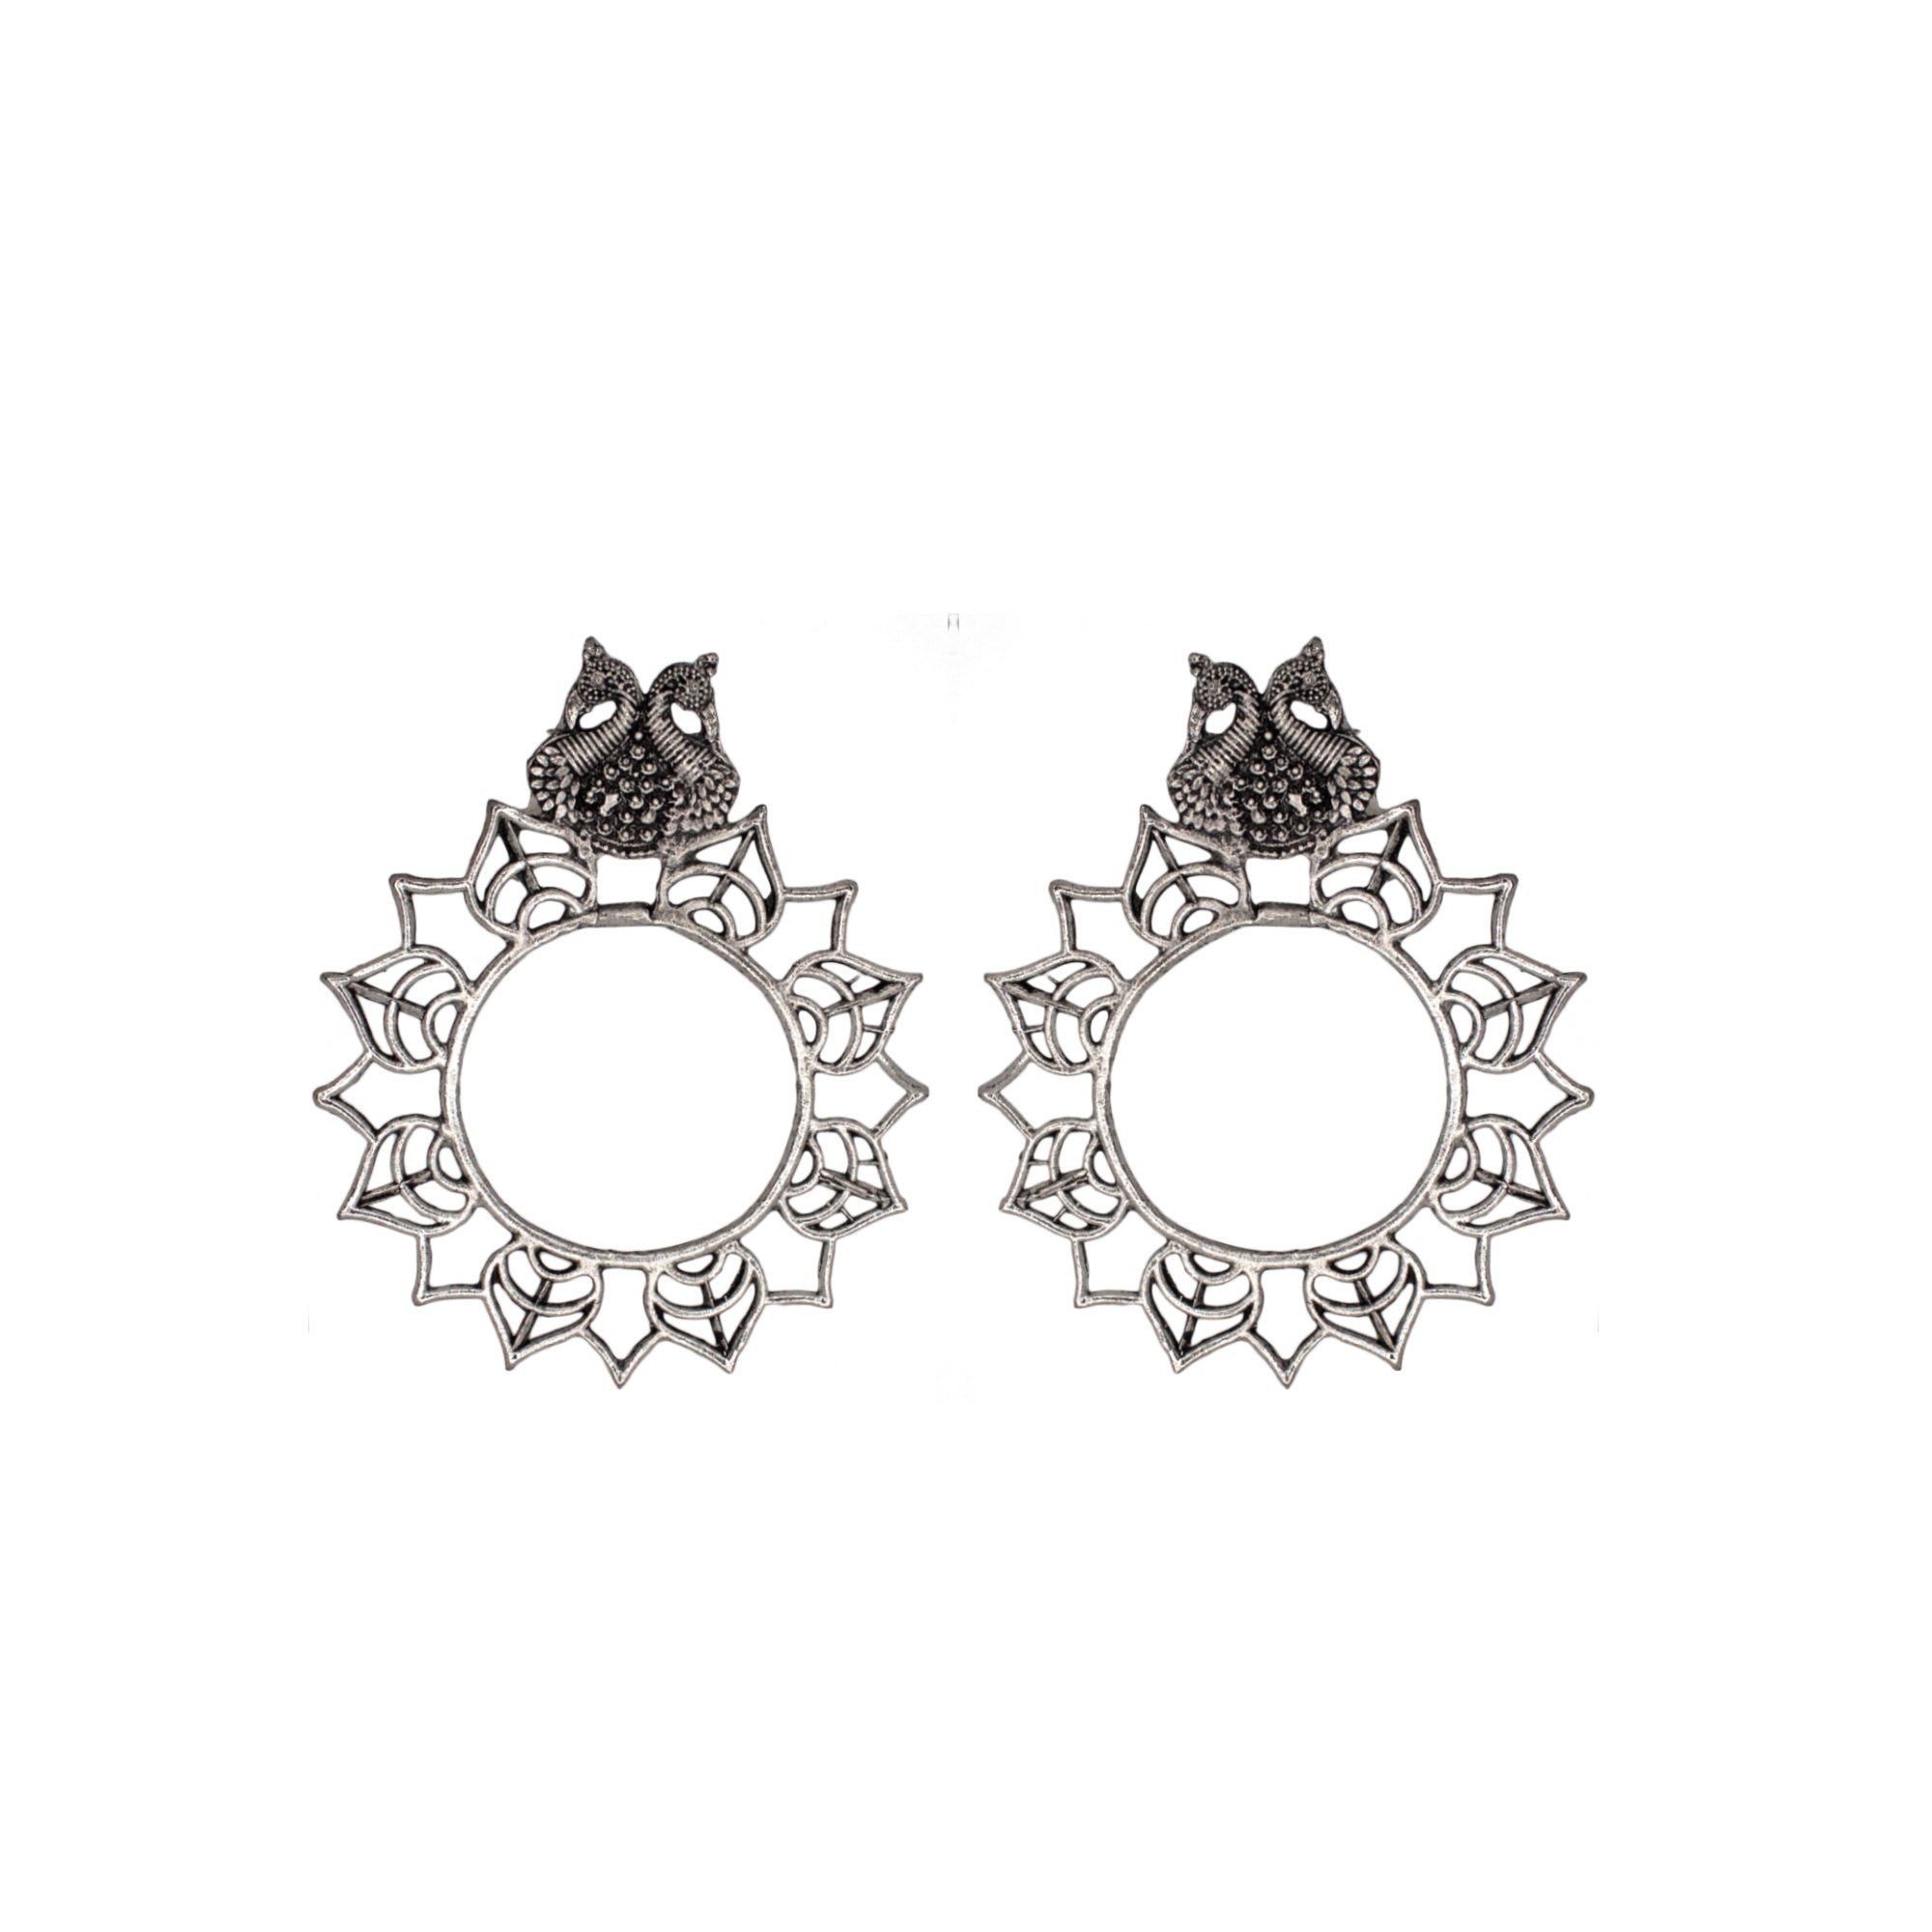 Abhinn Silver Oxidised Peacock and Floral Design Stud Earrings For Women